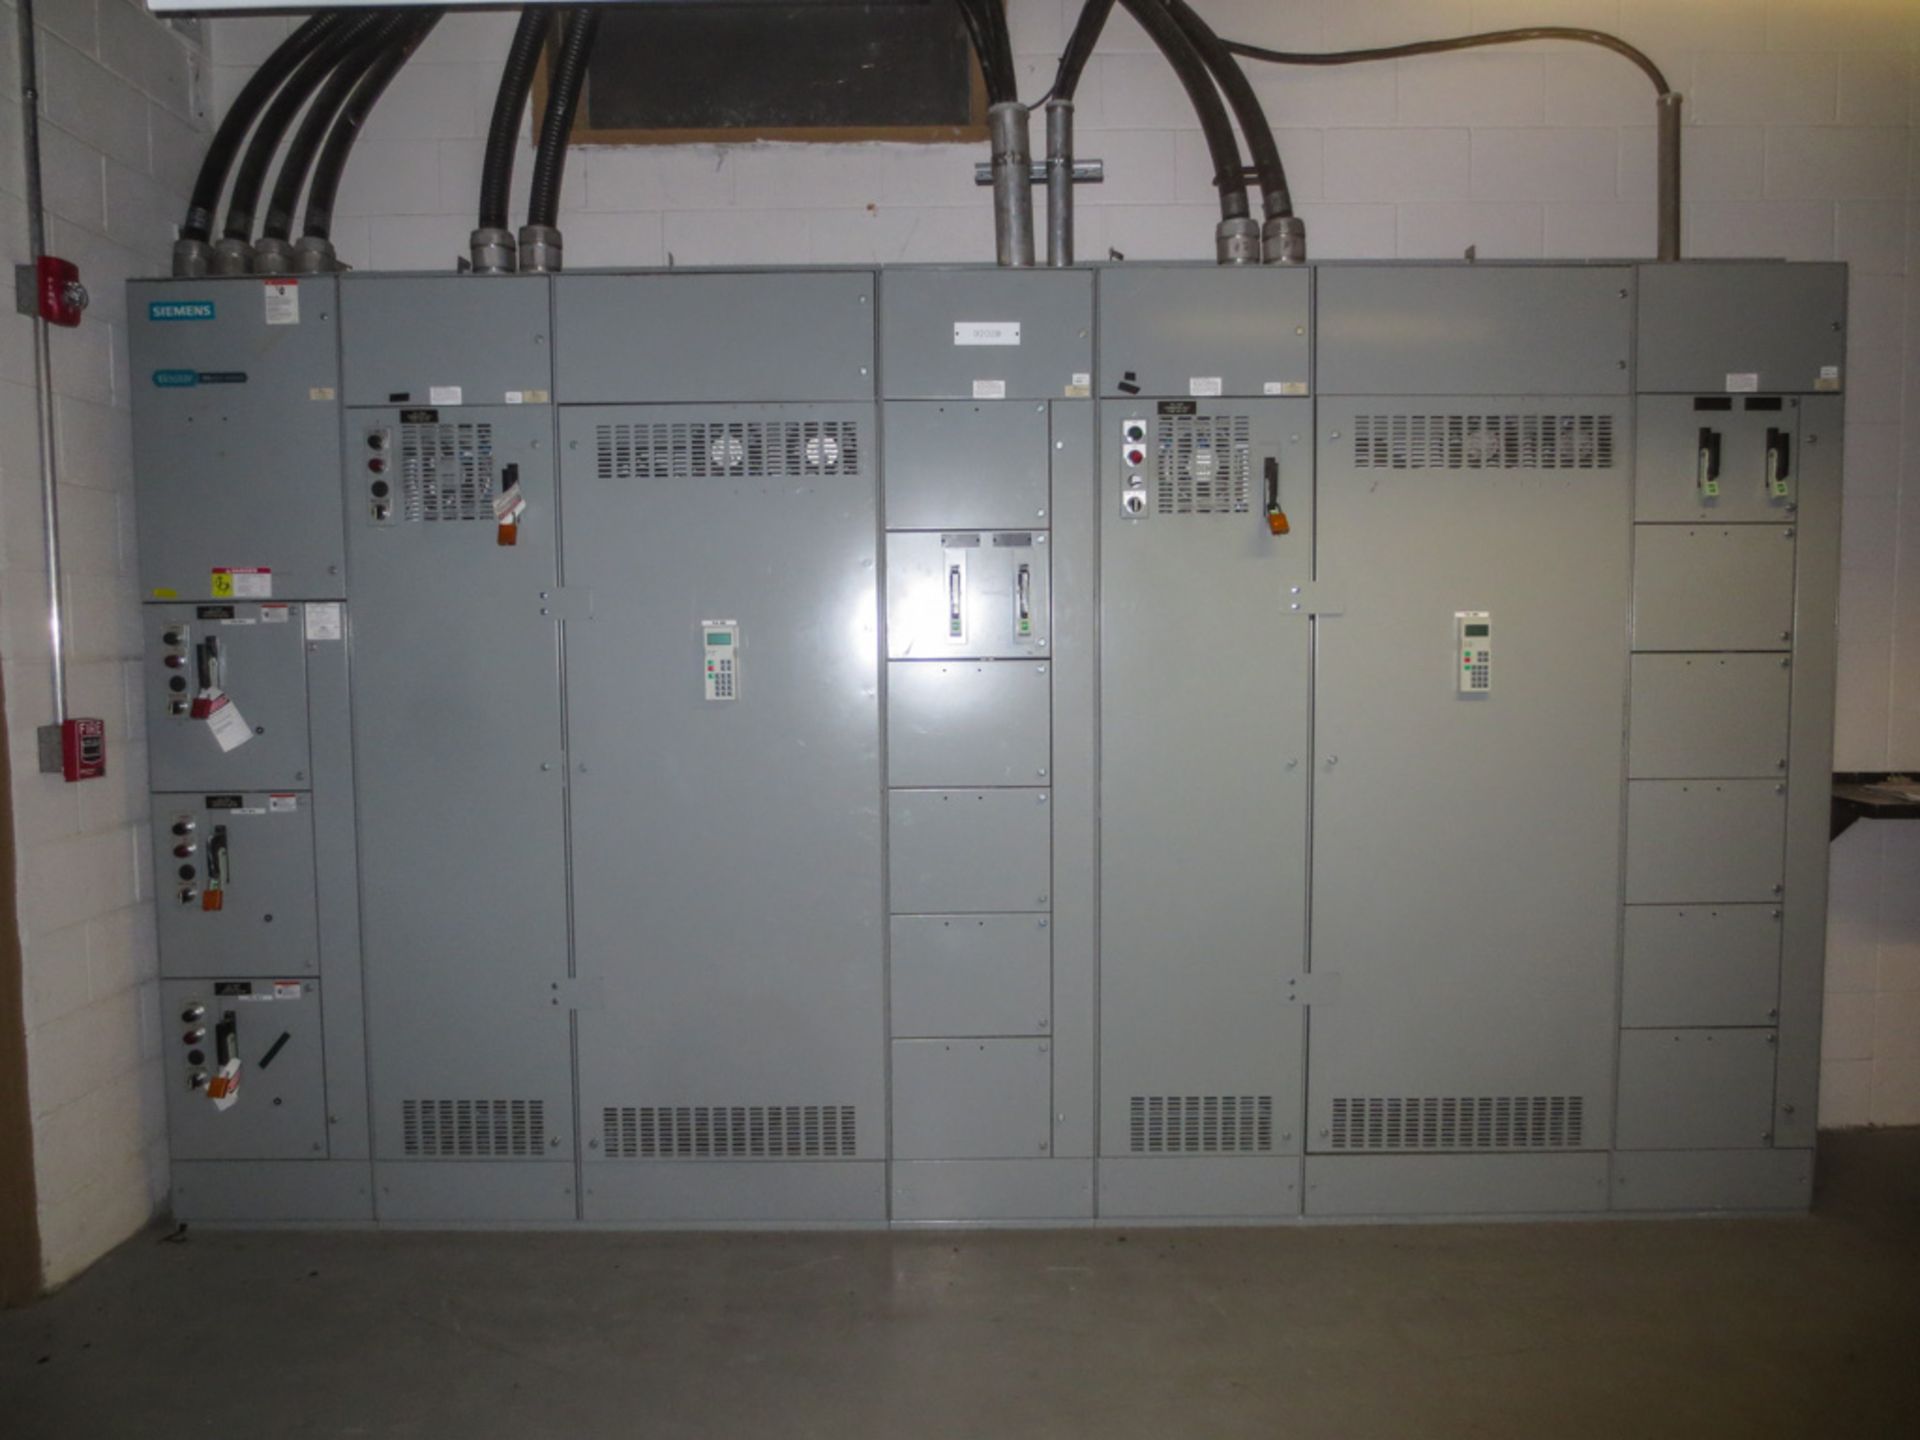 MCC 480v 1200A. Siemens 1200A horizontal, 600A vertical bus. Has 7 sections containing (3) size 3 st